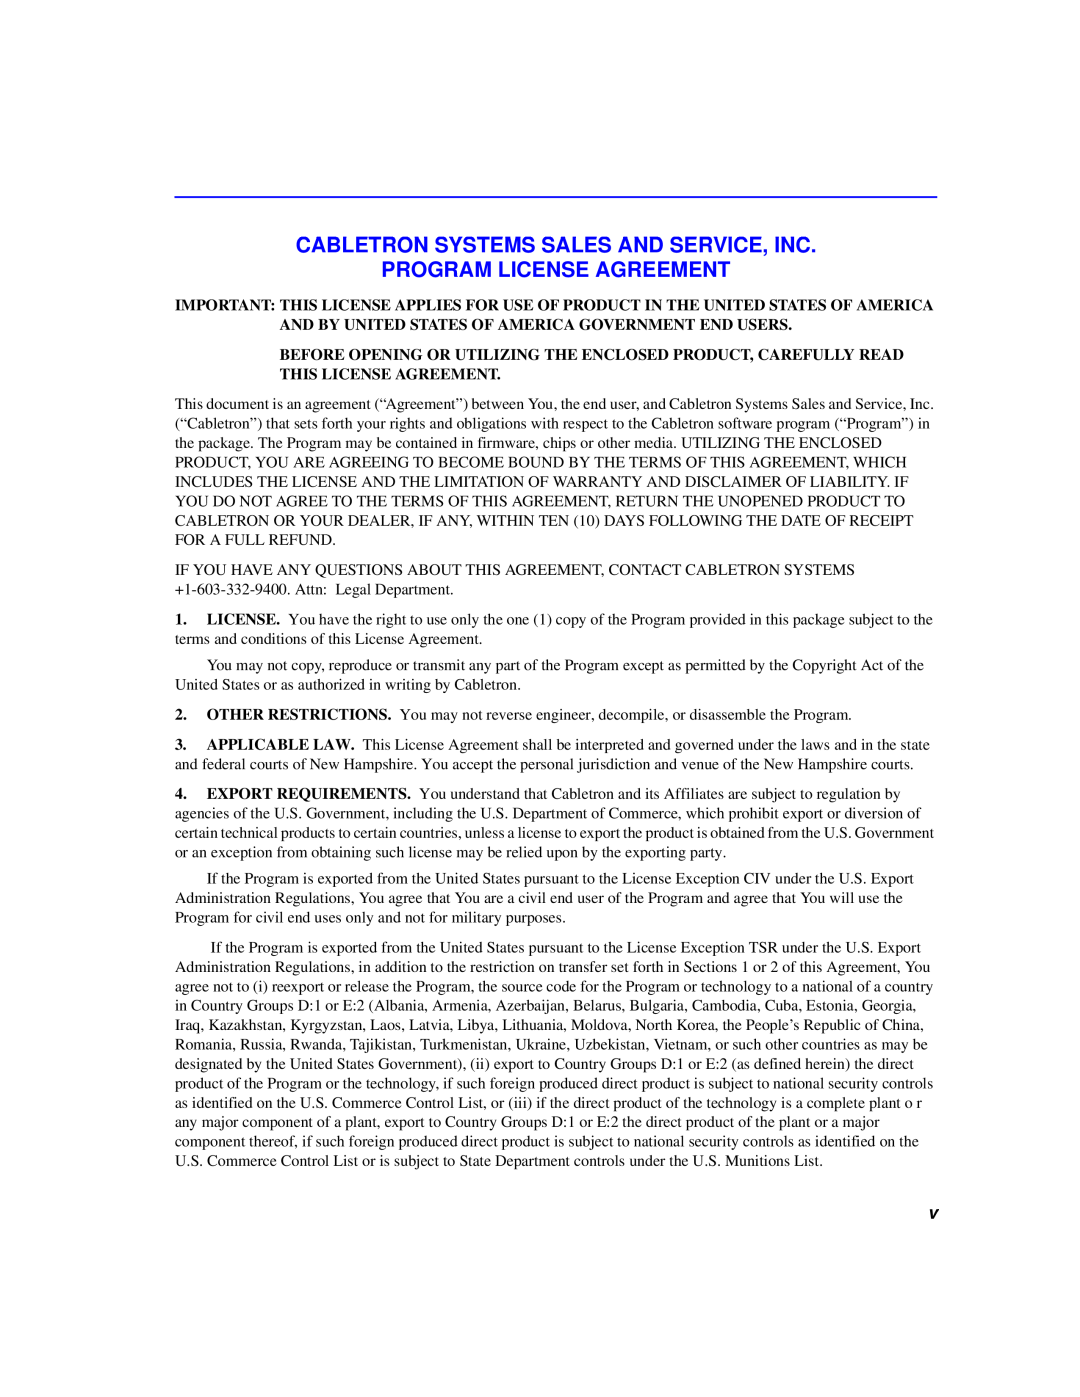 Cabletron Systems 6000 manual Cabletron Systems Sales And Service, Inc Program License Agreement 